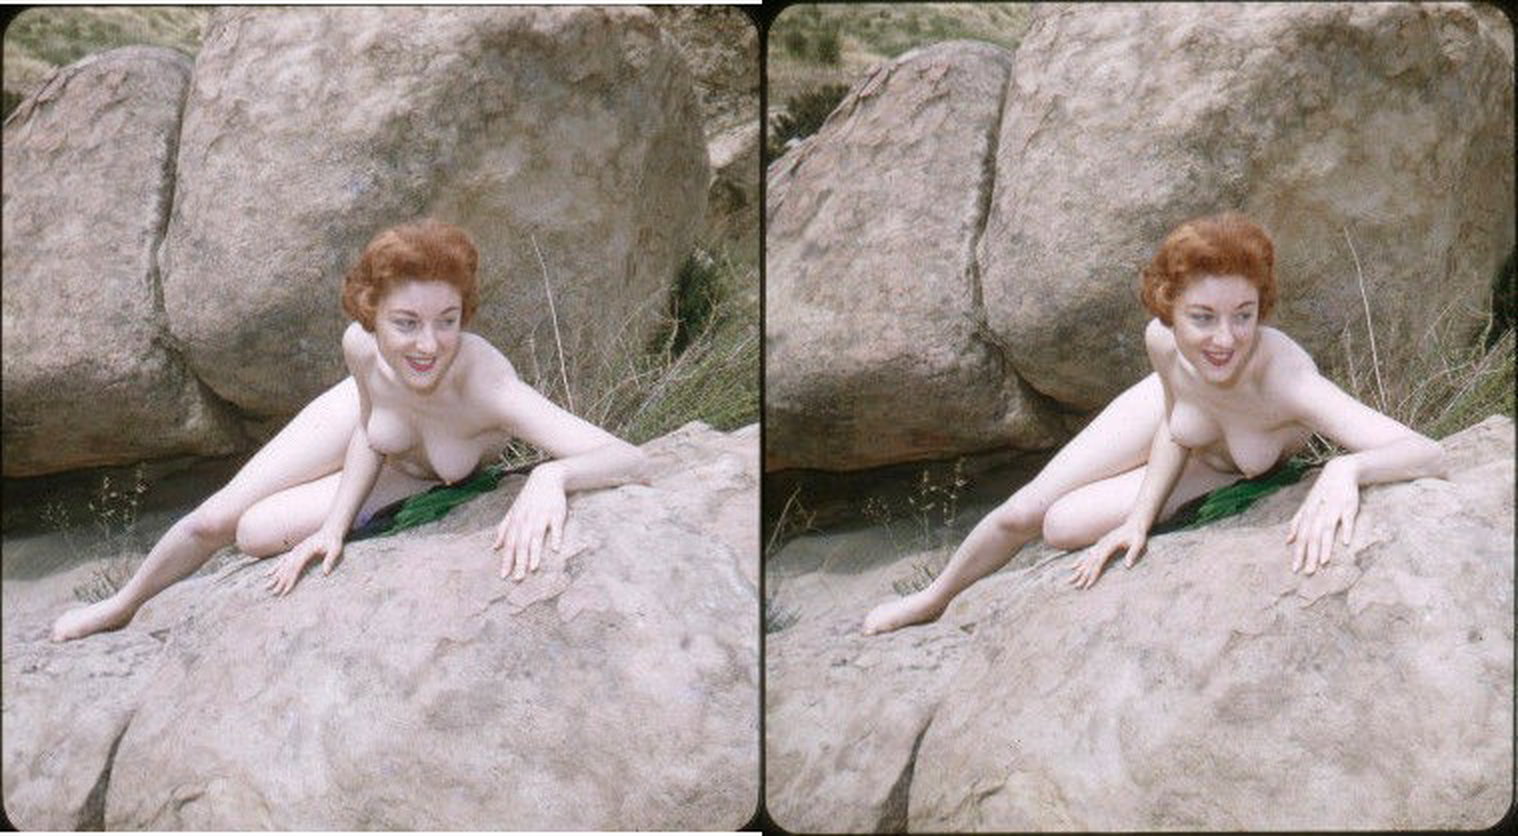 Photo by HornyFollower with the username @HornyFollower, who is a verified user, posted on January 17, 2019. The post is about the topic Naked Slides: 1950 - 1970 and the text says 'Another 3D Stereoscopic slide.
Hint: Try crossing your eyes slightly until the two images overlap the 'middle' image should appear to be 3D!'